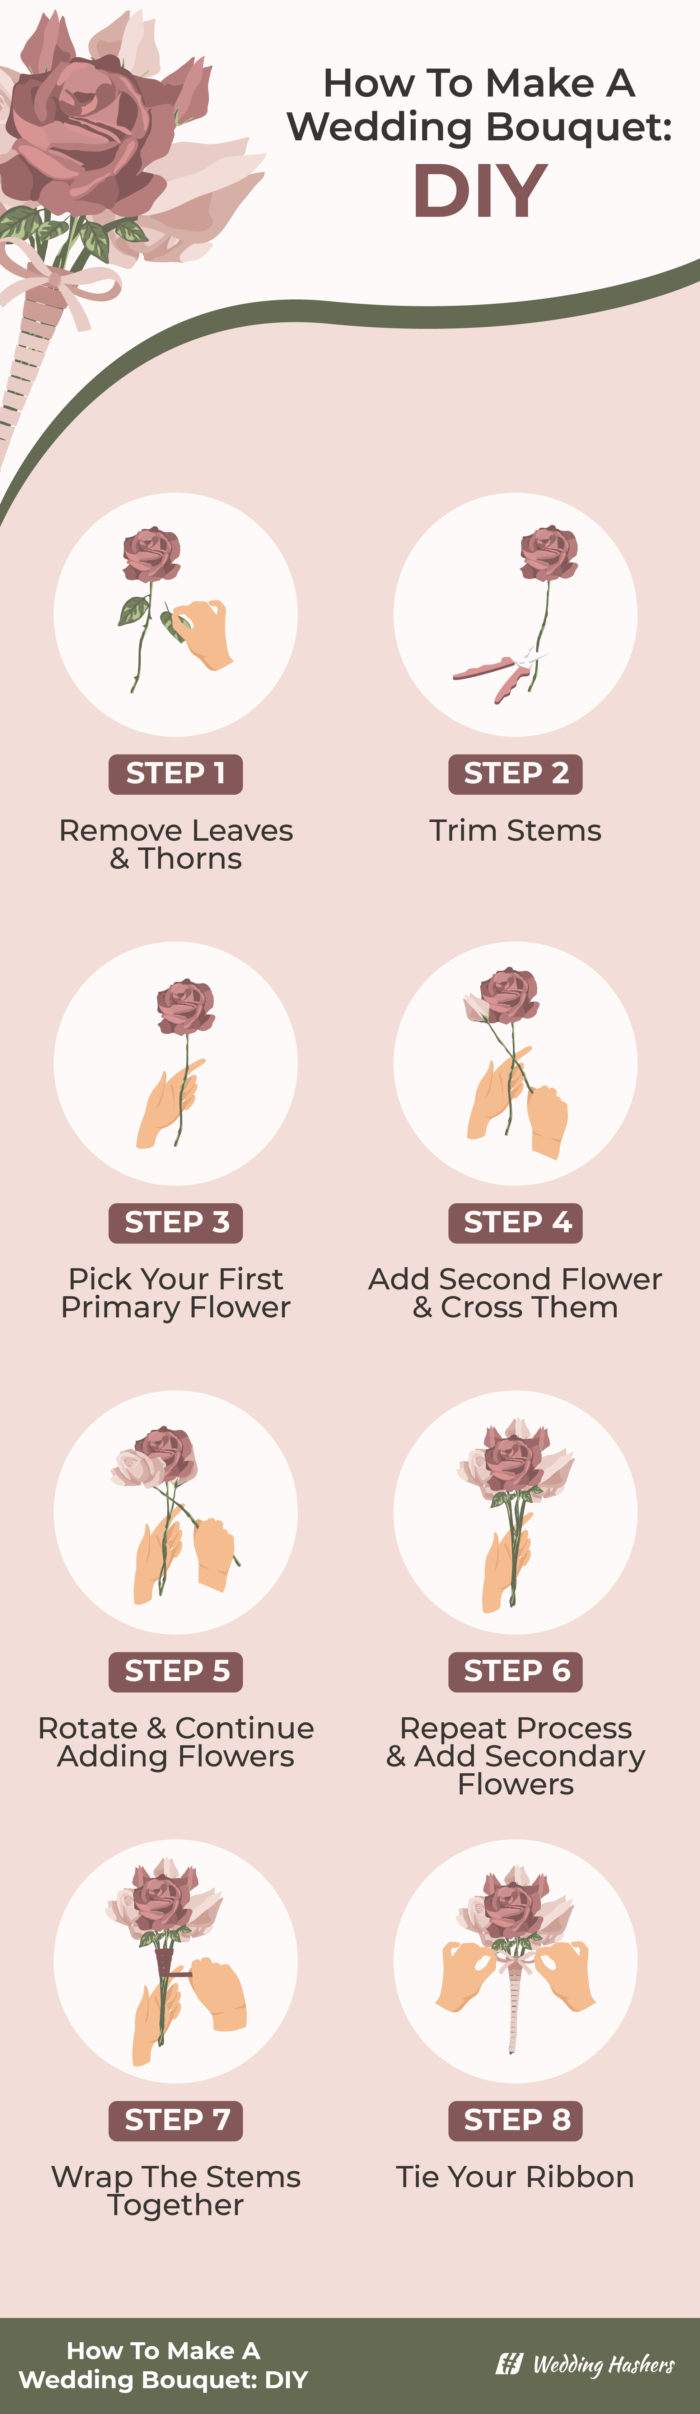 how to make a wedding bouquet inforgraphic